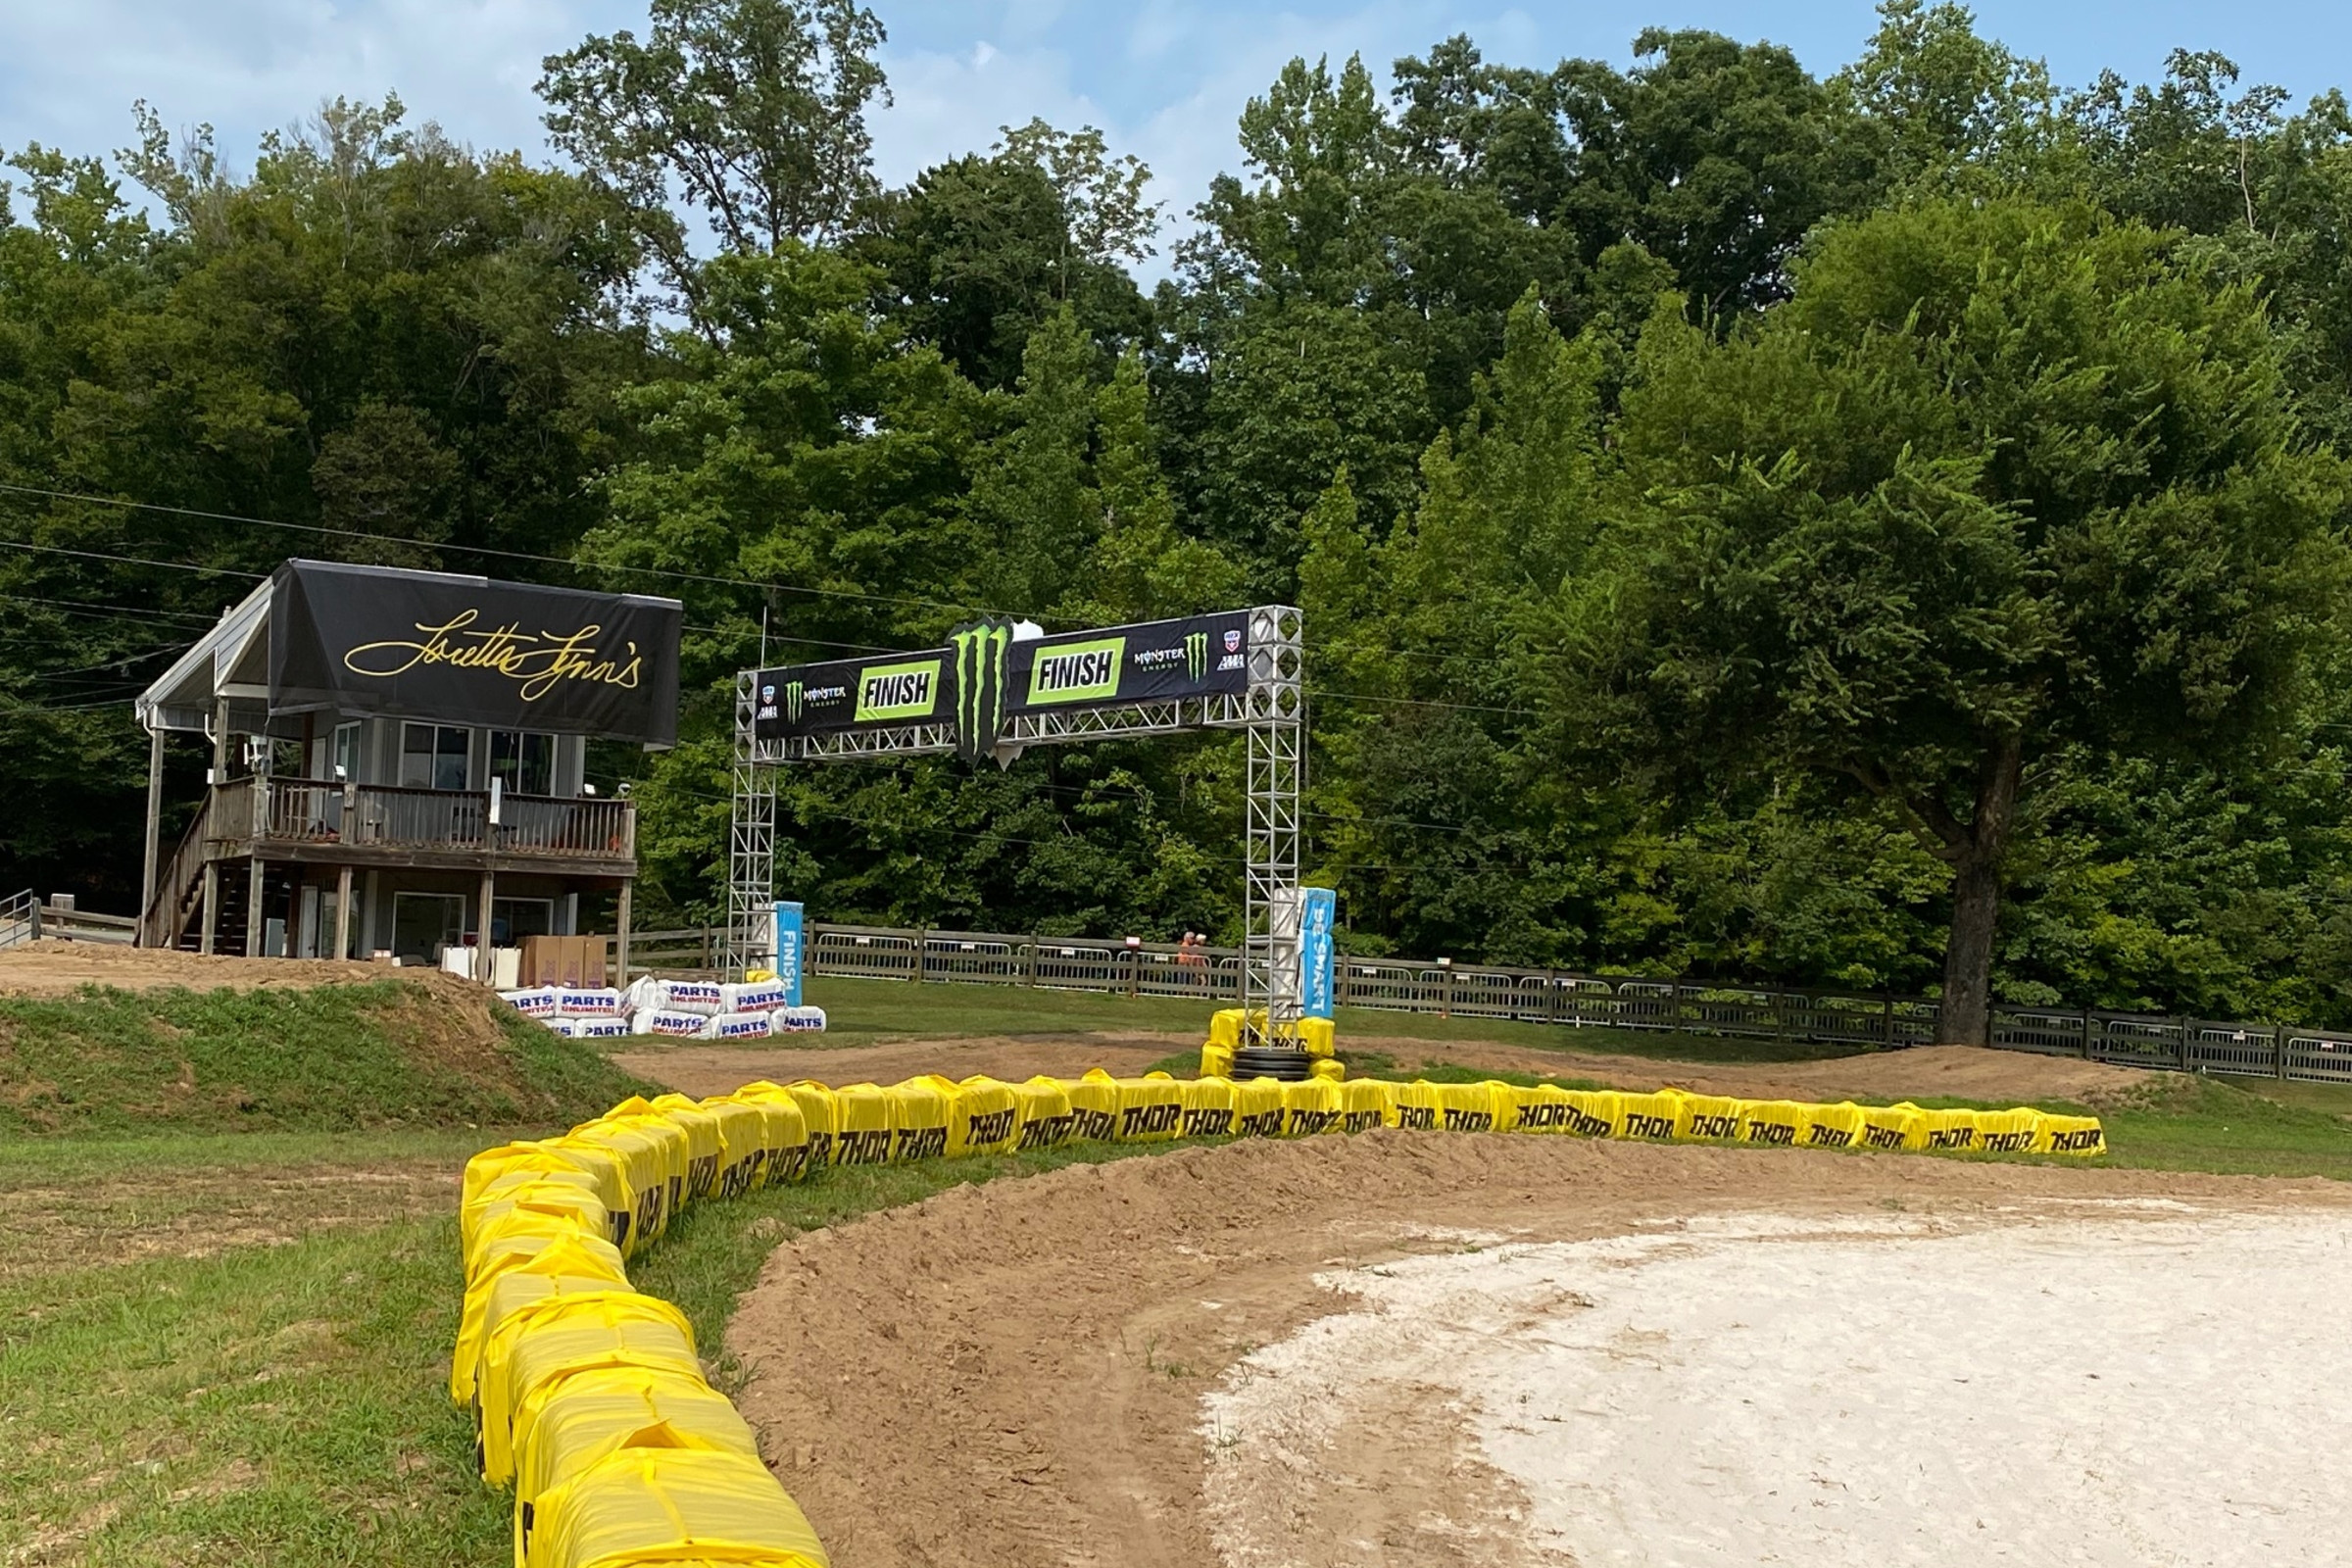 Live Results From 2021 AMA Amateur National Motocross Championship Loretta Lynns